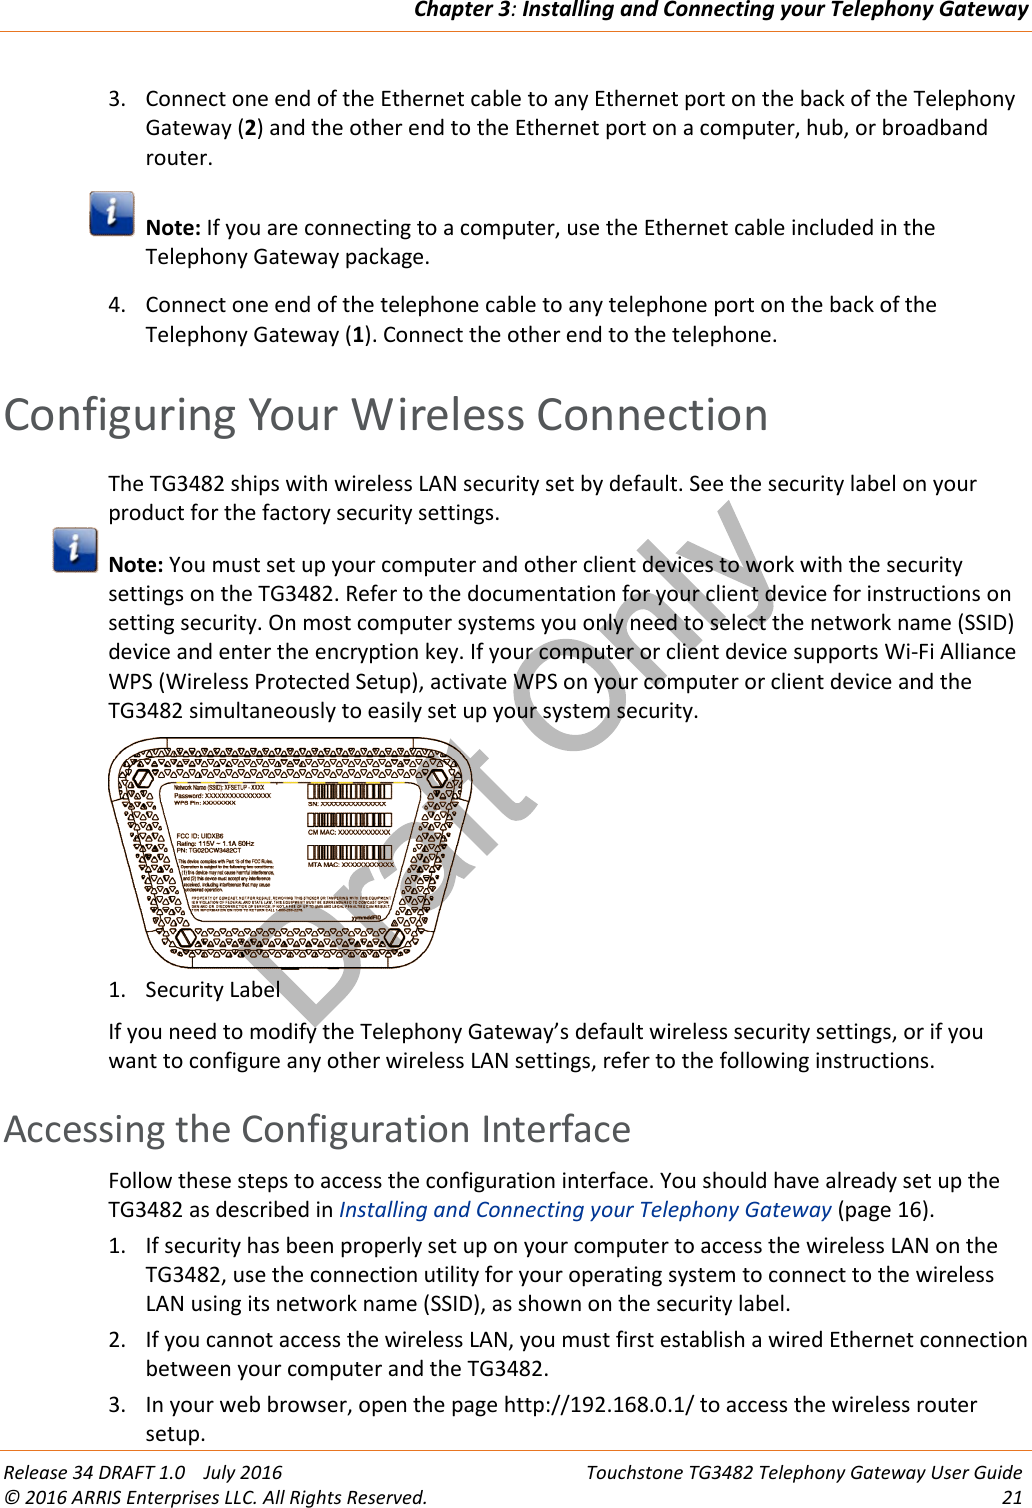 Draft OnlyChapter 3:Installing and Connecting your Telephony GatewayRelease 34 DRAFT 1.0 July 2016 Touchstone TG3482 Telephony Gateway User Guide© 2016 ARRIS Enterprises LLC. All Rights Reserved. 213. Connect one end of the Ethernet cable to any Ethernet port on the back of the TelephonyGateway (2) and the other end to the Ethernet port on a computer, hub, or broadbandrouter.Note: If you are connecting to a computer, use the Ethernet cable included in theTelephony Gateway package.4. Connect one end of the telephone cable to any telephone port on the back of theTelephony Gateway (1). Connect the other end to the telephone.Configuring Your Wireless ConnectionThe TG3482 ships with wireless LAN security set by default. See the security label on yourproduct for the factory security settings.Note: You must set up your computer and other client devices to work with the securitysettings on the TG3482. Refer to the documentation for your client device for instructions onsetting security. On most computer systems you only need to select the network name (SSID)device and enter the encryption key. If your computer or client device supports Wi-Fi AllianceWPS (Wireless Protected Setup), activate WPS on your computer or client device and theTG3482 simultaneously to easily set up your system security.1. Security LabelIf you need to modify the Telephony Gateway’s default wireless security settings, or if youwant to configure any other wireless LAN settings, refer to the following instructions.Accessing the Configuration InterfaceFollow these steps to access the configuration interface. You should have already set up theTG3482 as described in Installing and Connecting your Telephony Gateway (page 16).1. If security has been properly set up on your computer to access the wireless LAN on theTG3482, use the connection utility for your operating system to connect to the wirelessLAN using its network name (SSID), as shown on the security label.2. If you cannot access the wireless LAN, you must first establish a wired Ethernet connectionbetween your computer and the TG3482.3. In your web browser, open the page http://192.168.0.1/ to access the wireless routersetup.